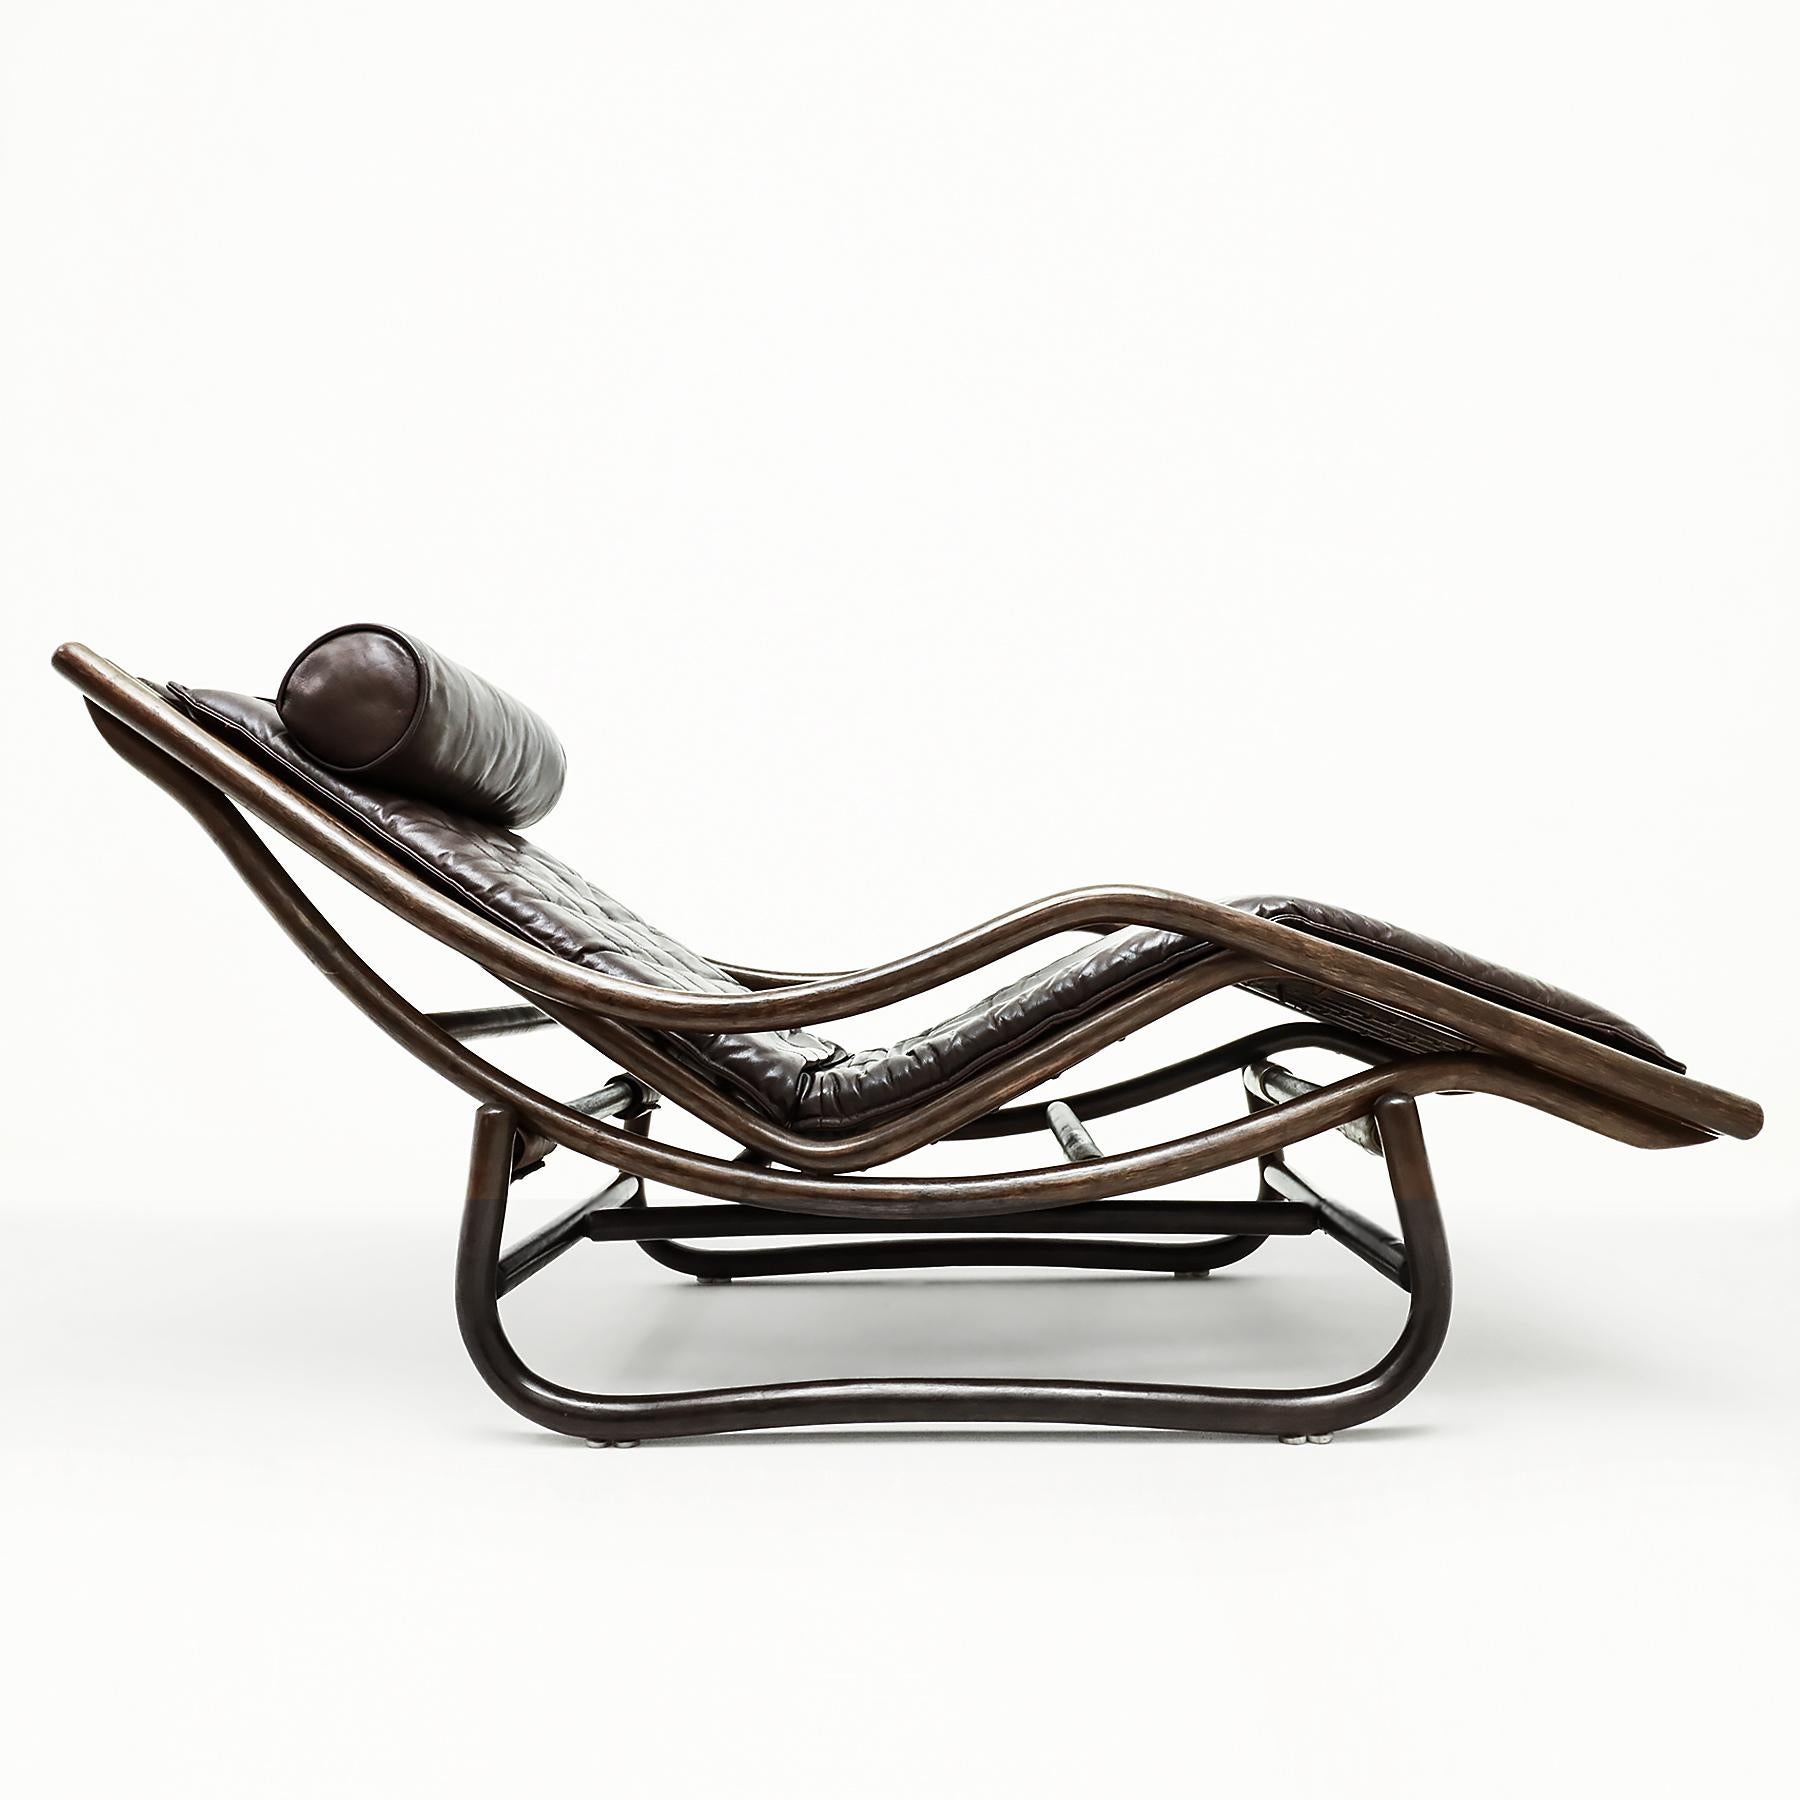 A very rare and unusual cane and chocolate brown leather chaise longue attributed to Dutch manufacturer Rohe Noordwolde. 

This design utilizes the same concept as Corbusier’s famous LC4 chaise of using a simple curved frame set on a sled base. This